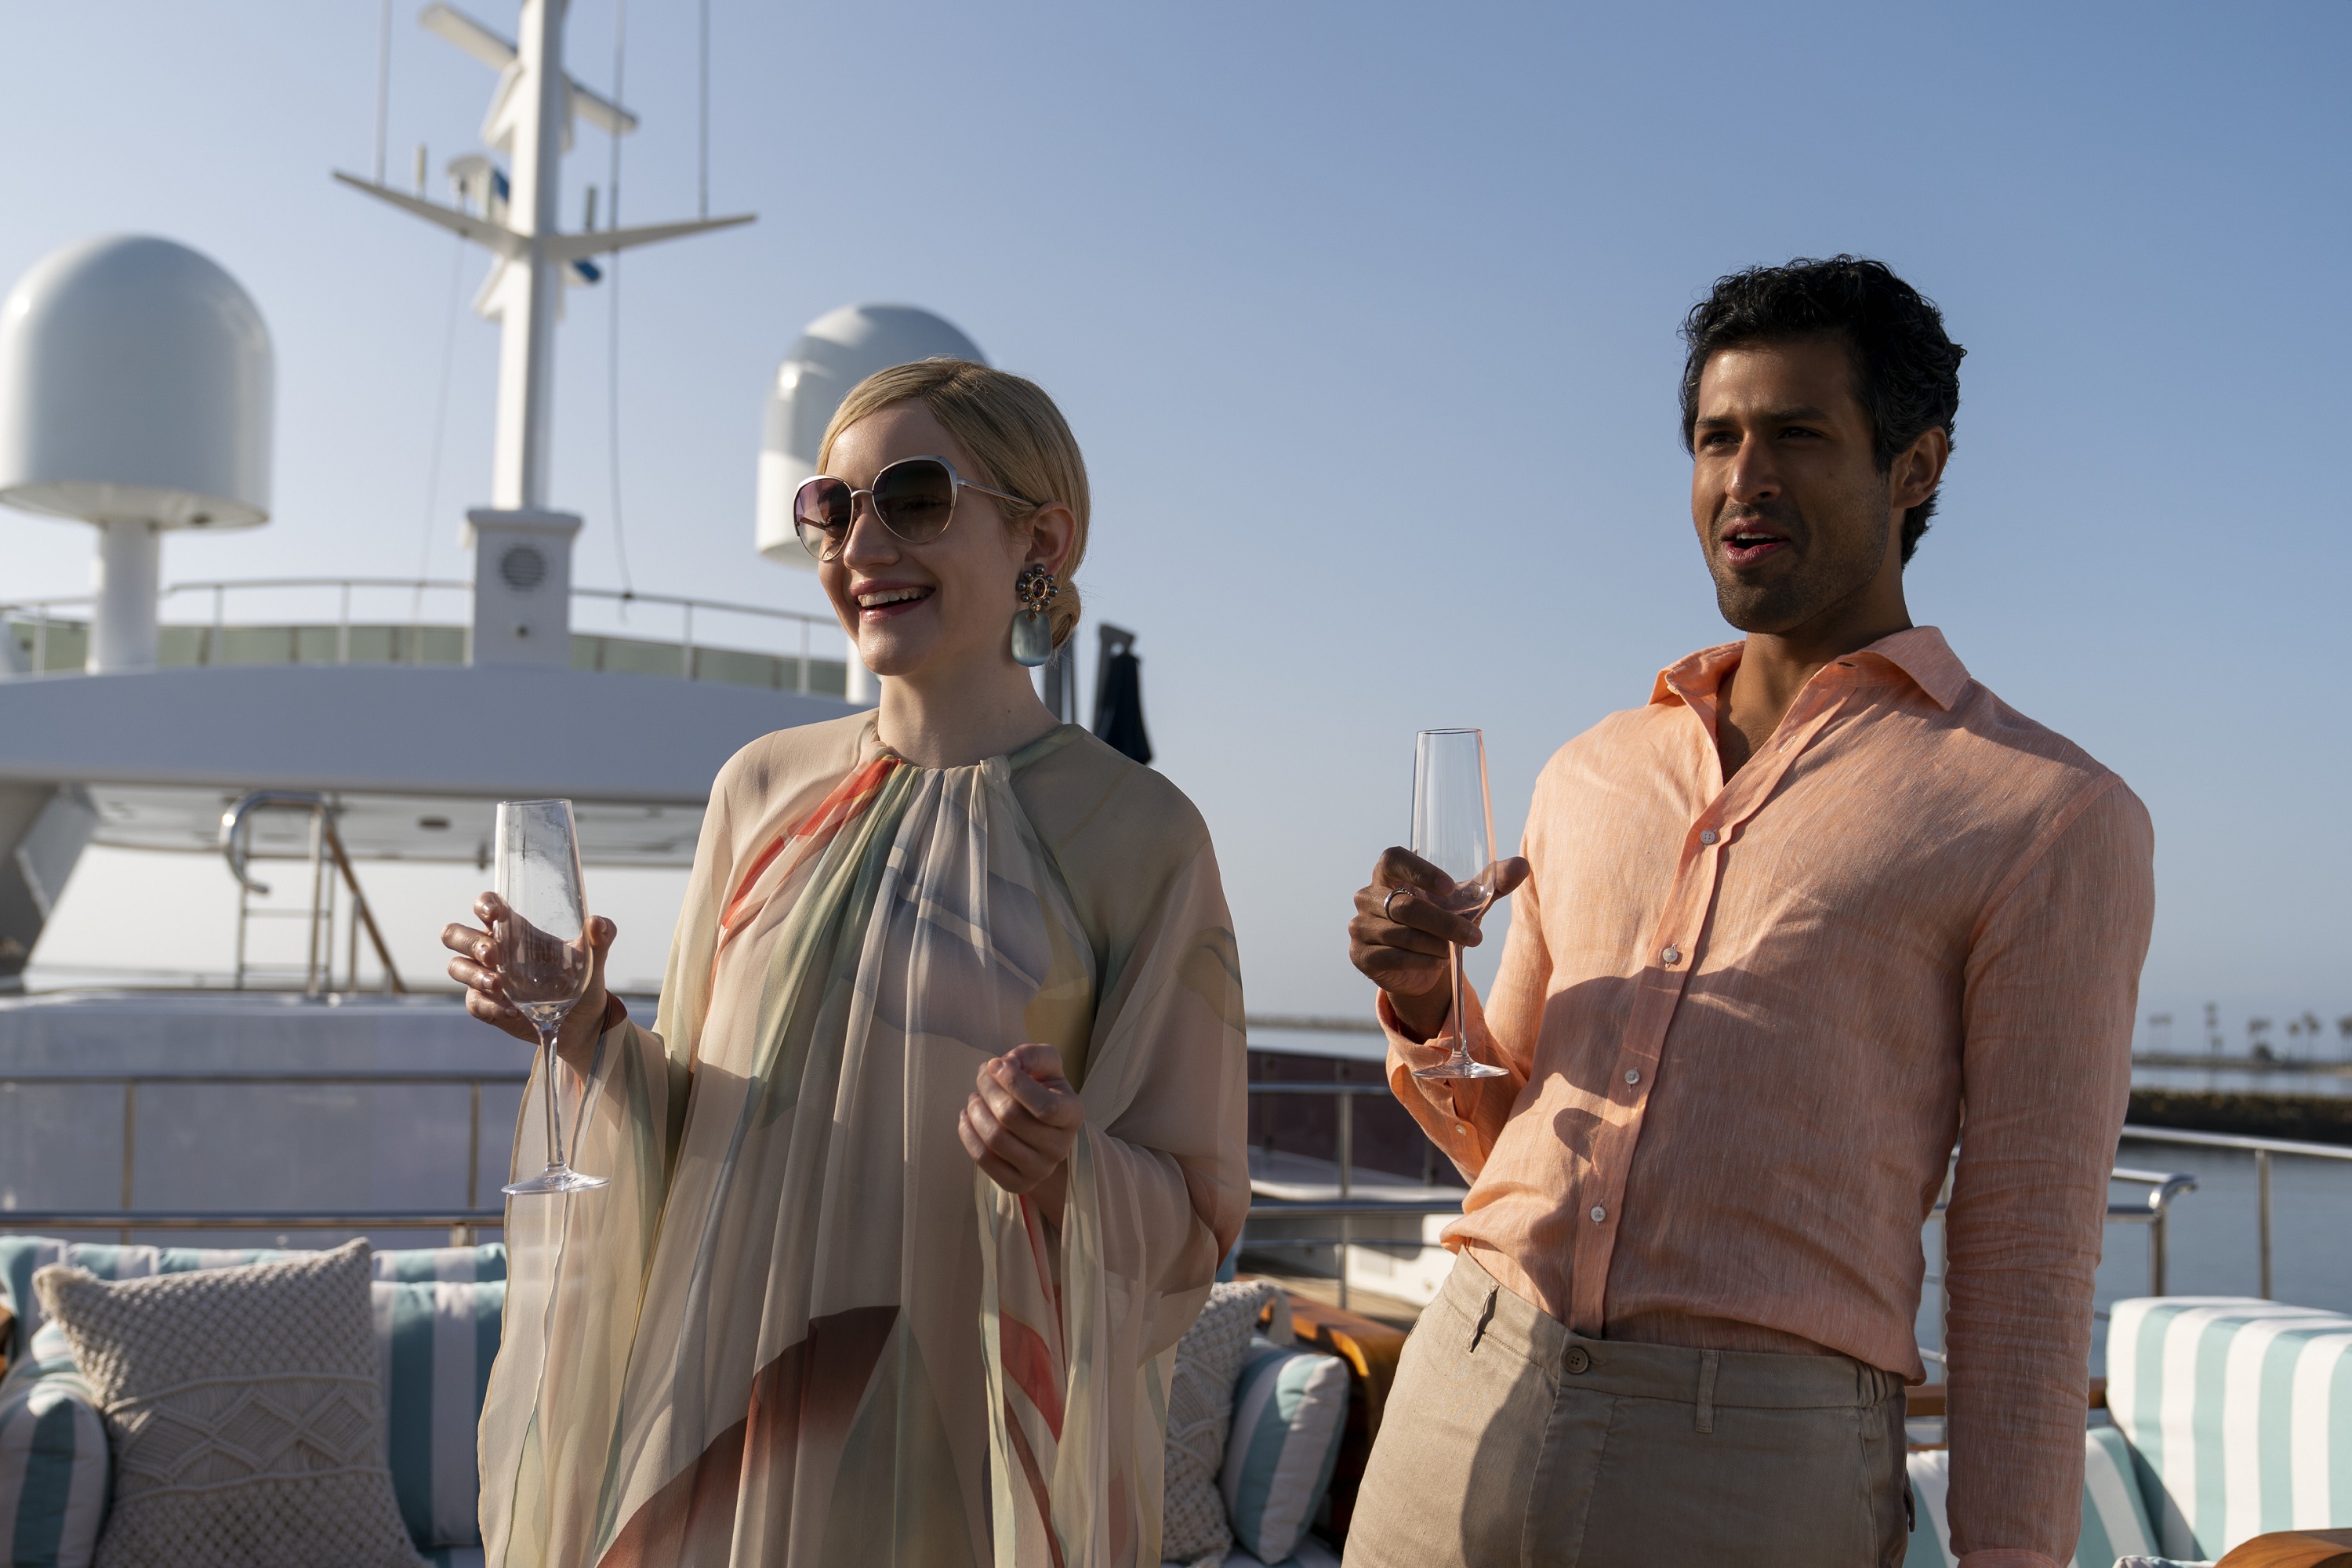 'Inventing Anna' cast members Julia Garner and Saamer Usmani holding drinks on a yacht as Anna Delvey and Chase Sikorski